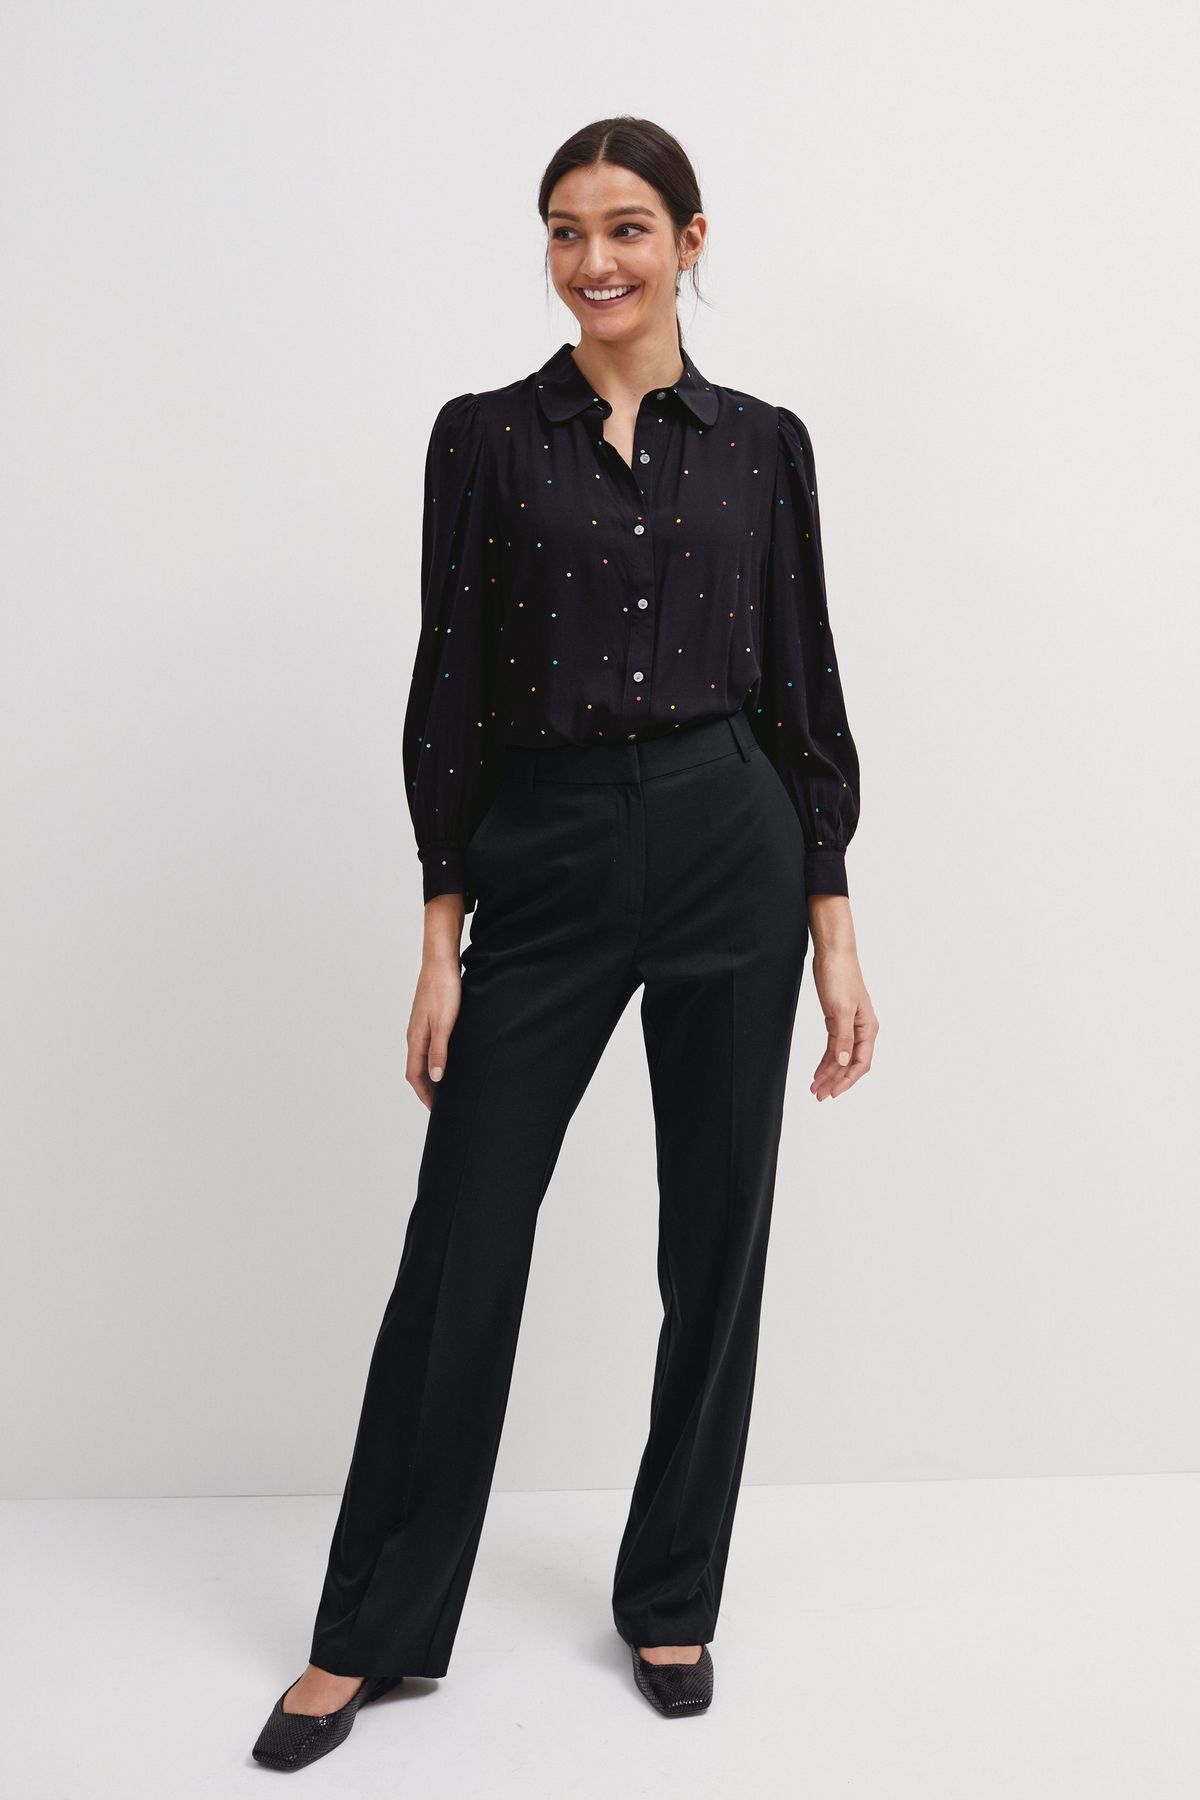 NEXT Tailored Boot Cut Trousers Black Women Trousers